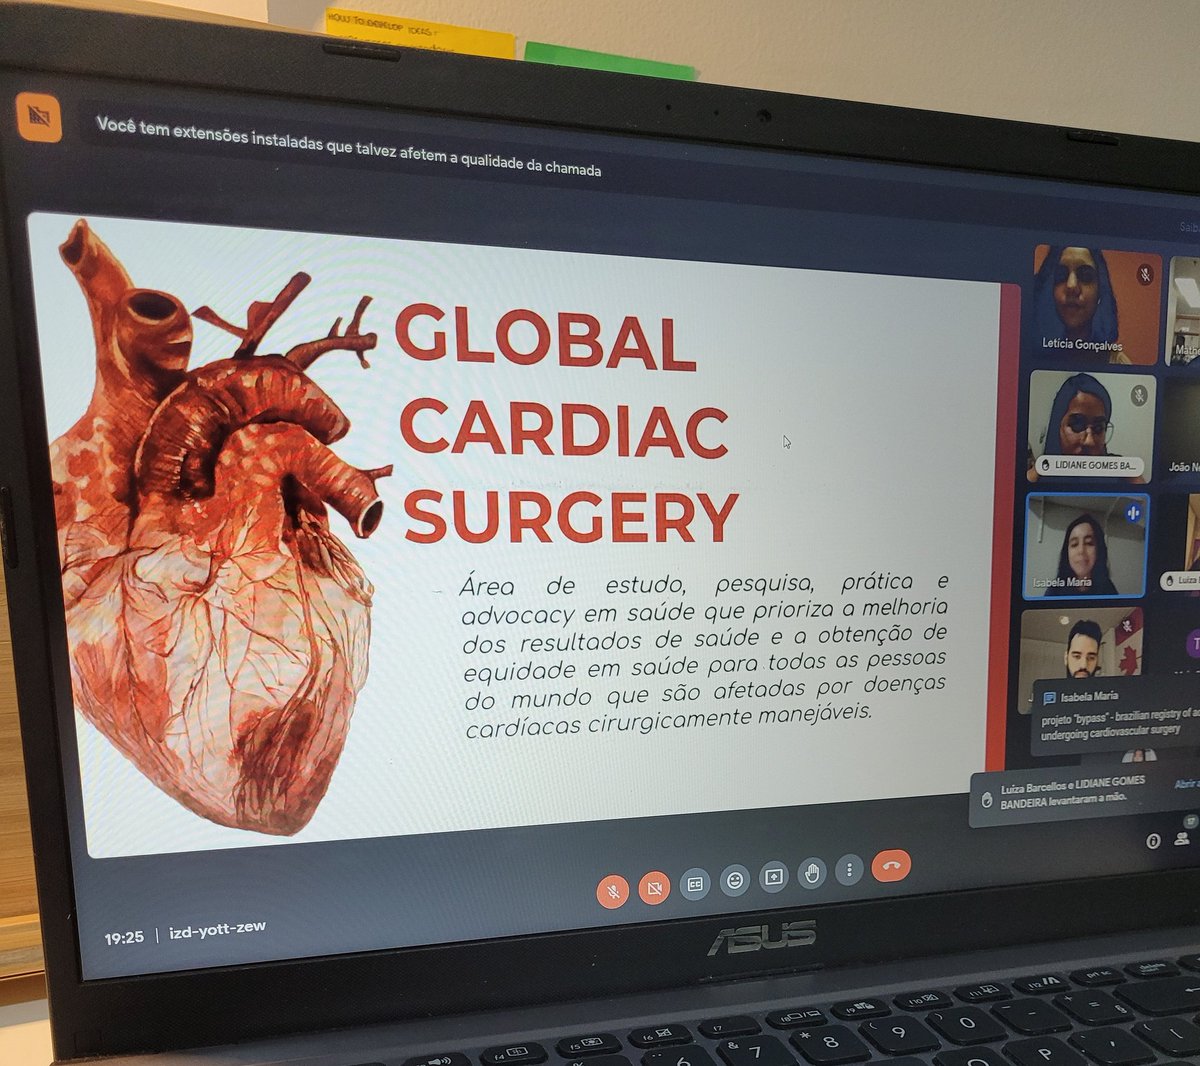 Today's #JournalClub @InciSioNBr  🫀✨️ Honored to discuss recent research about #GlobalCardiacSurgery and advocate for it with this amazing team! 

#TheFutureOfTheOR #GlobalSurgery #CardiacSurgery
#MedTwitter